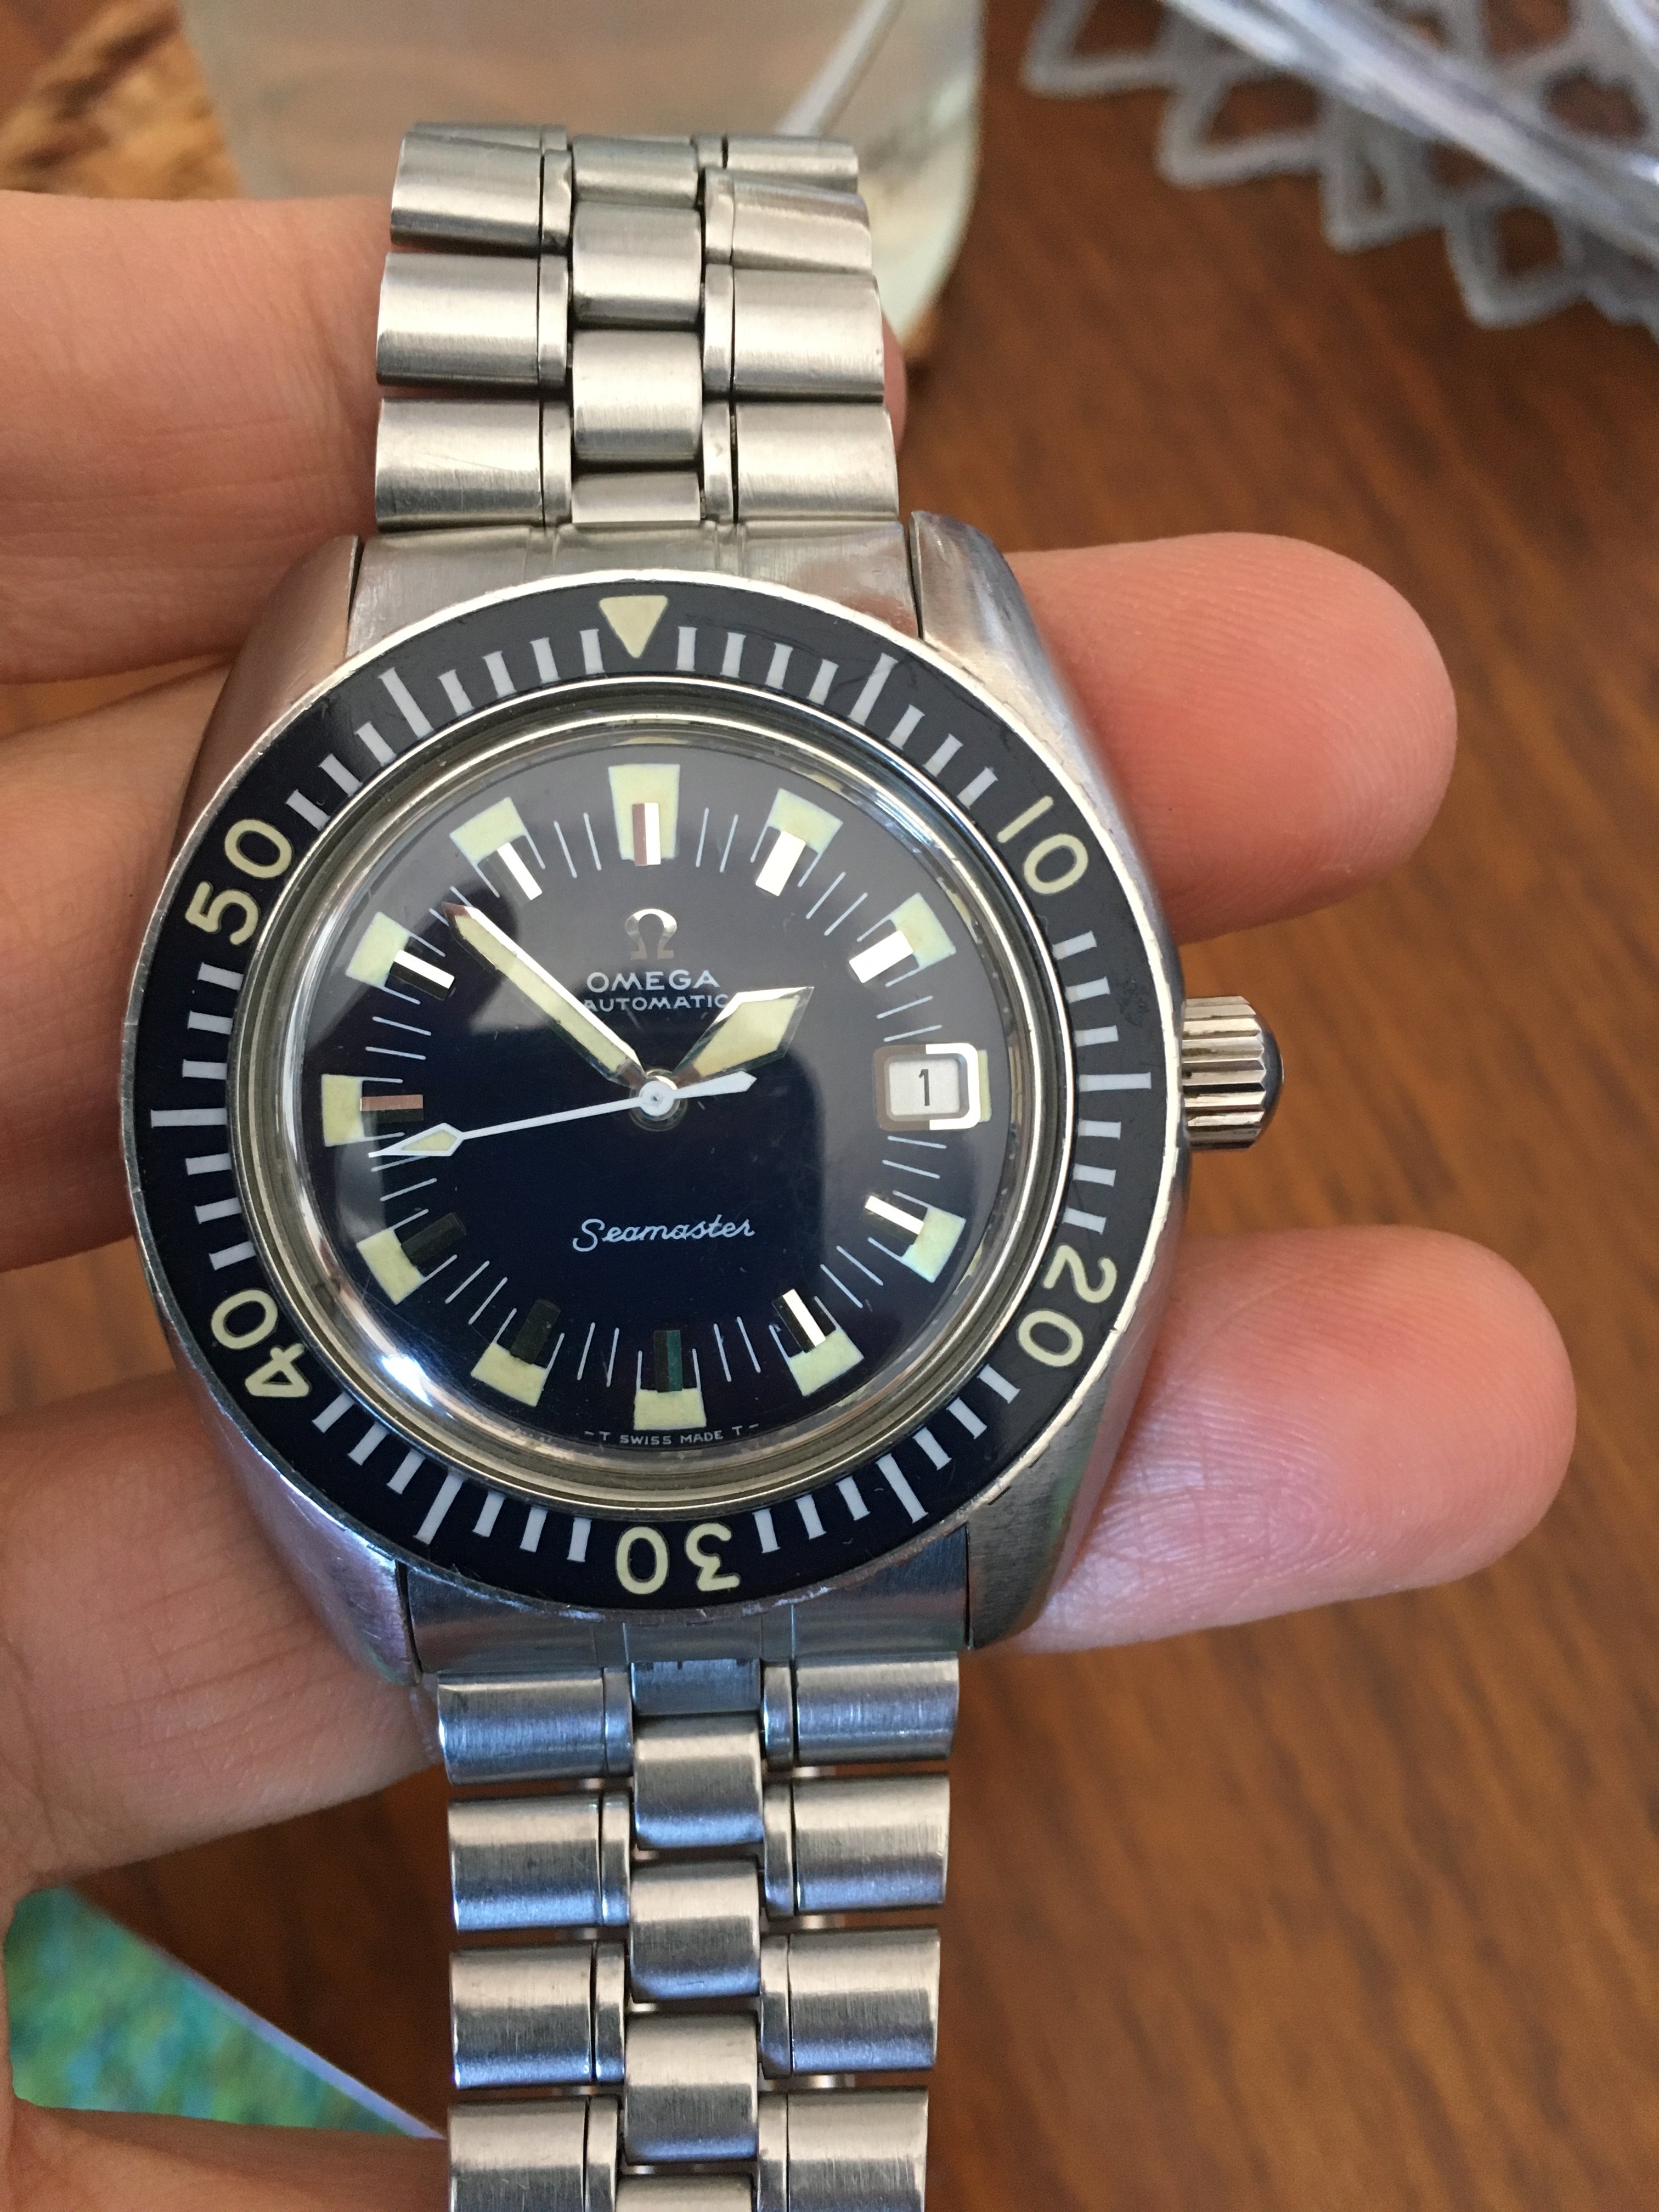 Everything about the Seamaster 120 